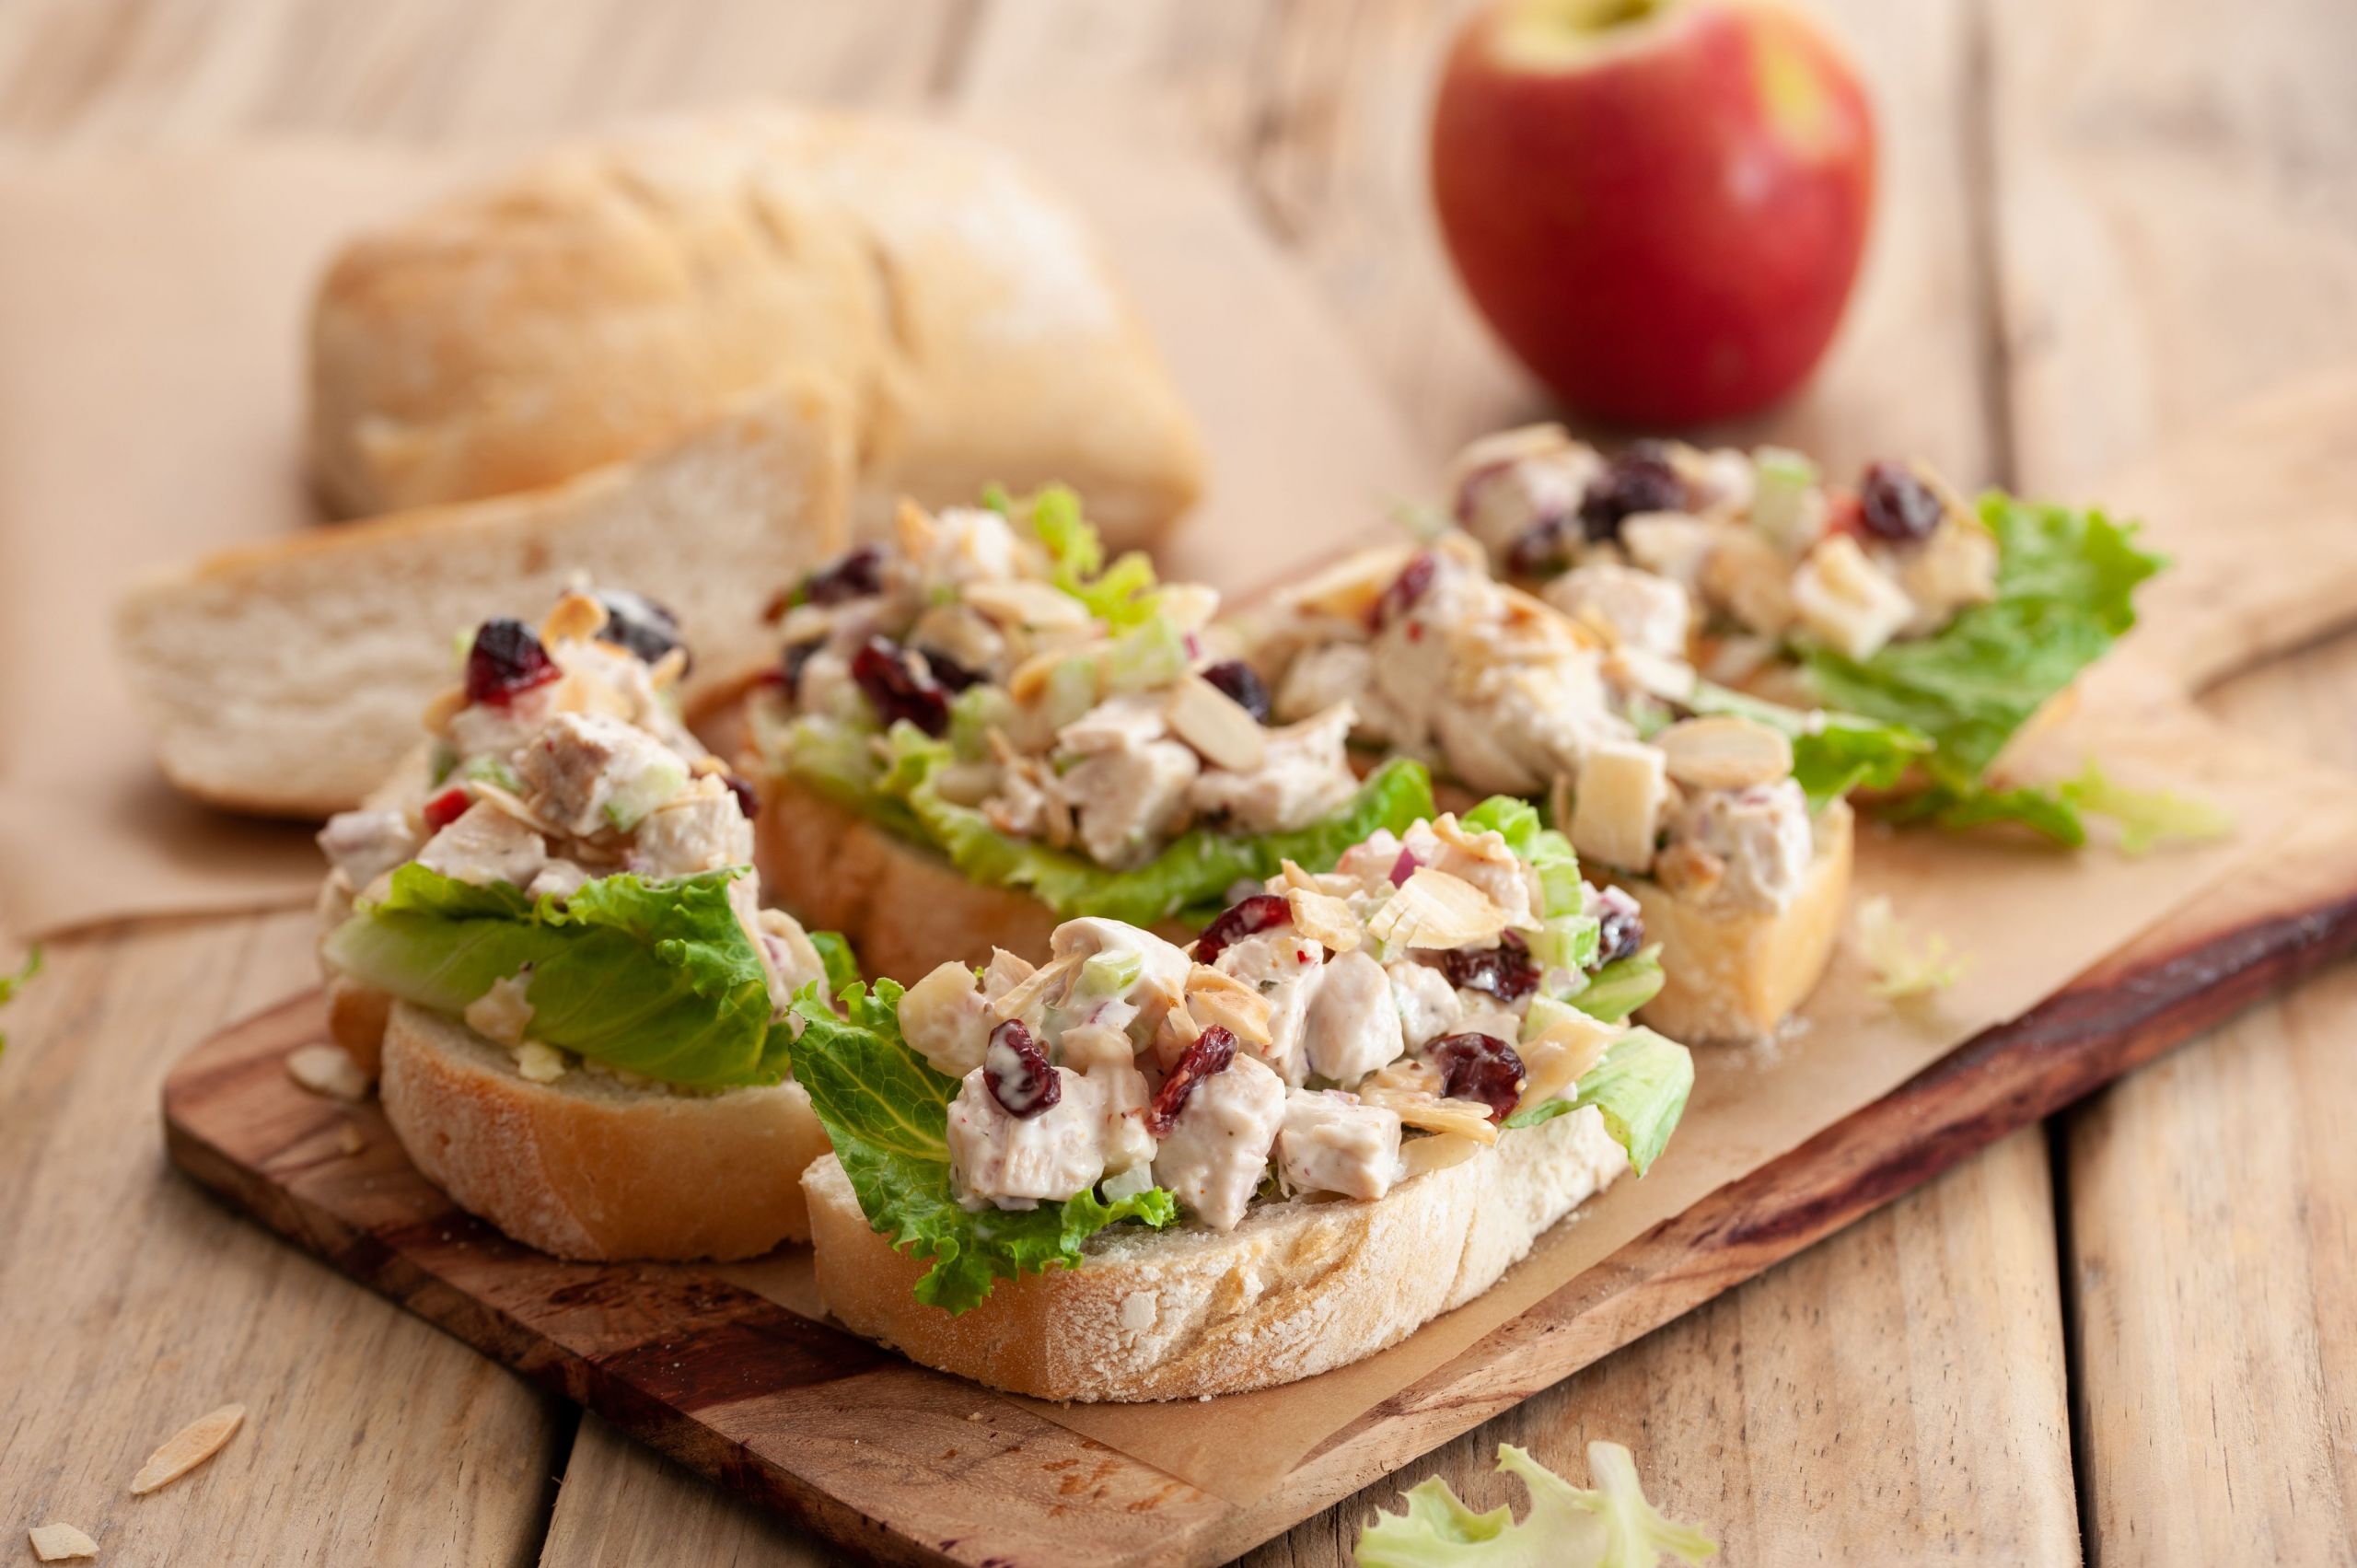 Chicken Salad Recipe with Apples Lovely Chicken Salad with Apples and Cranberries Recipe